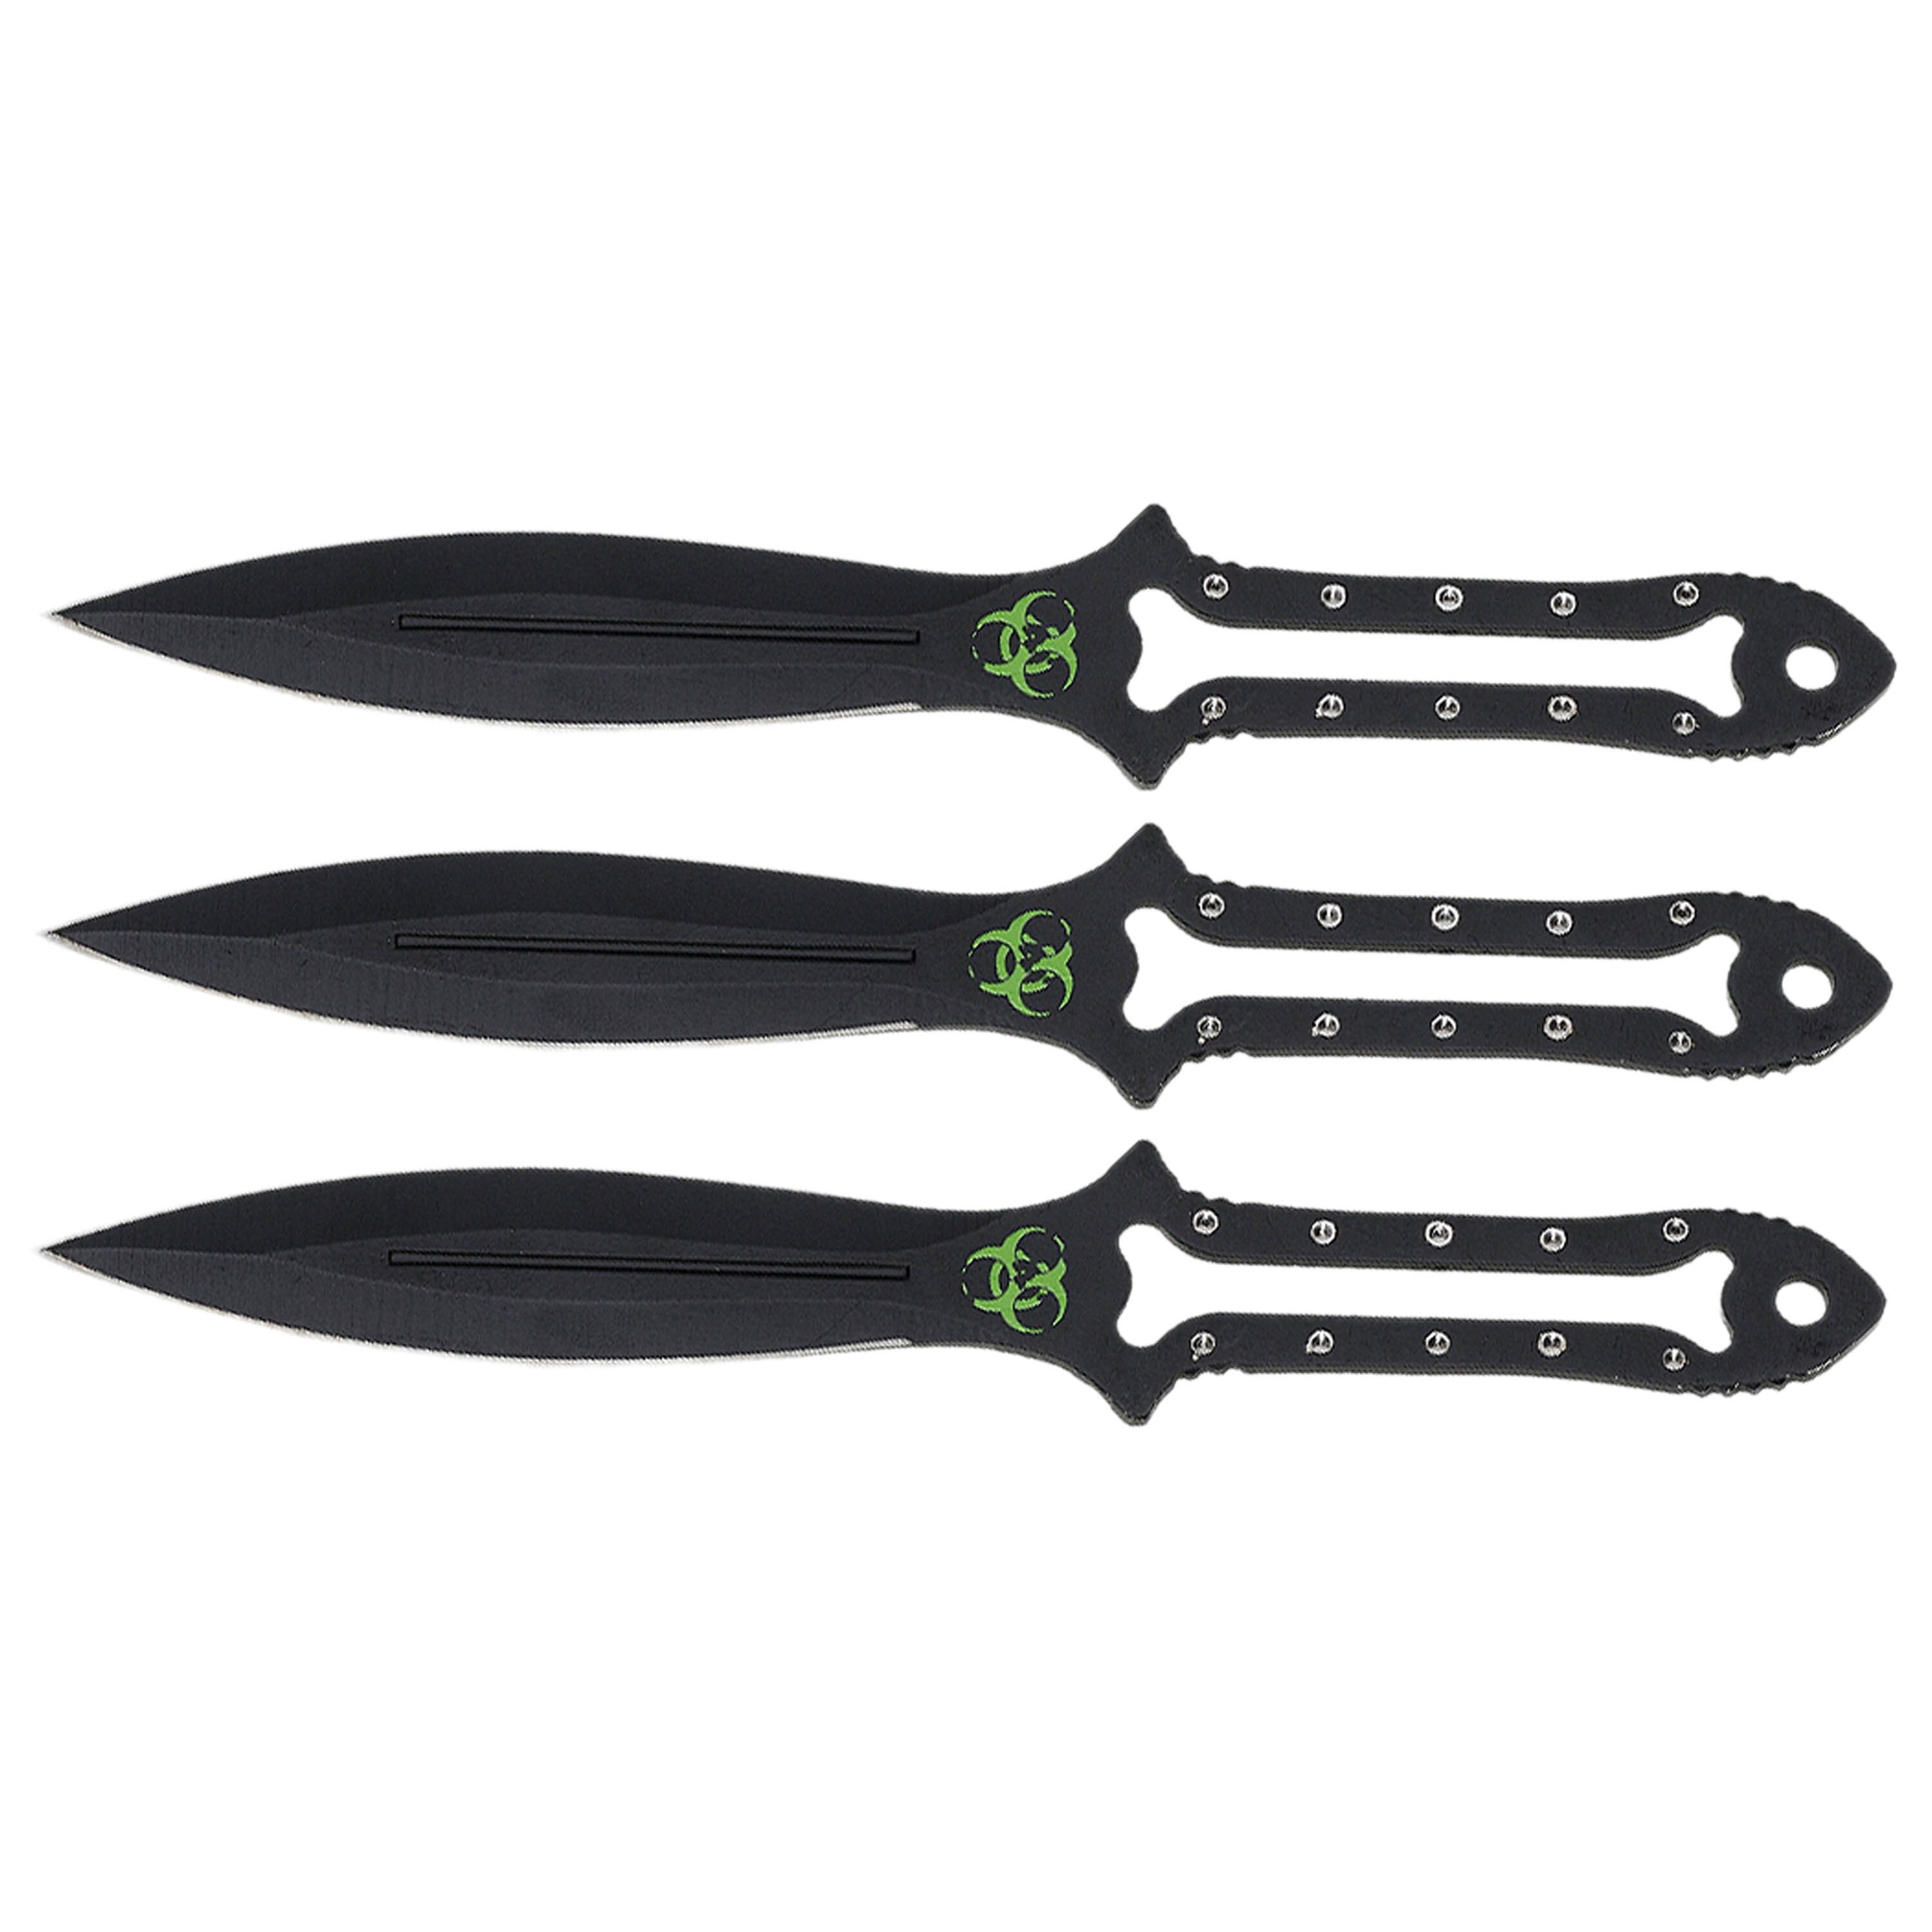 Purchase the Haller Training Butterfly Knife by ASMC